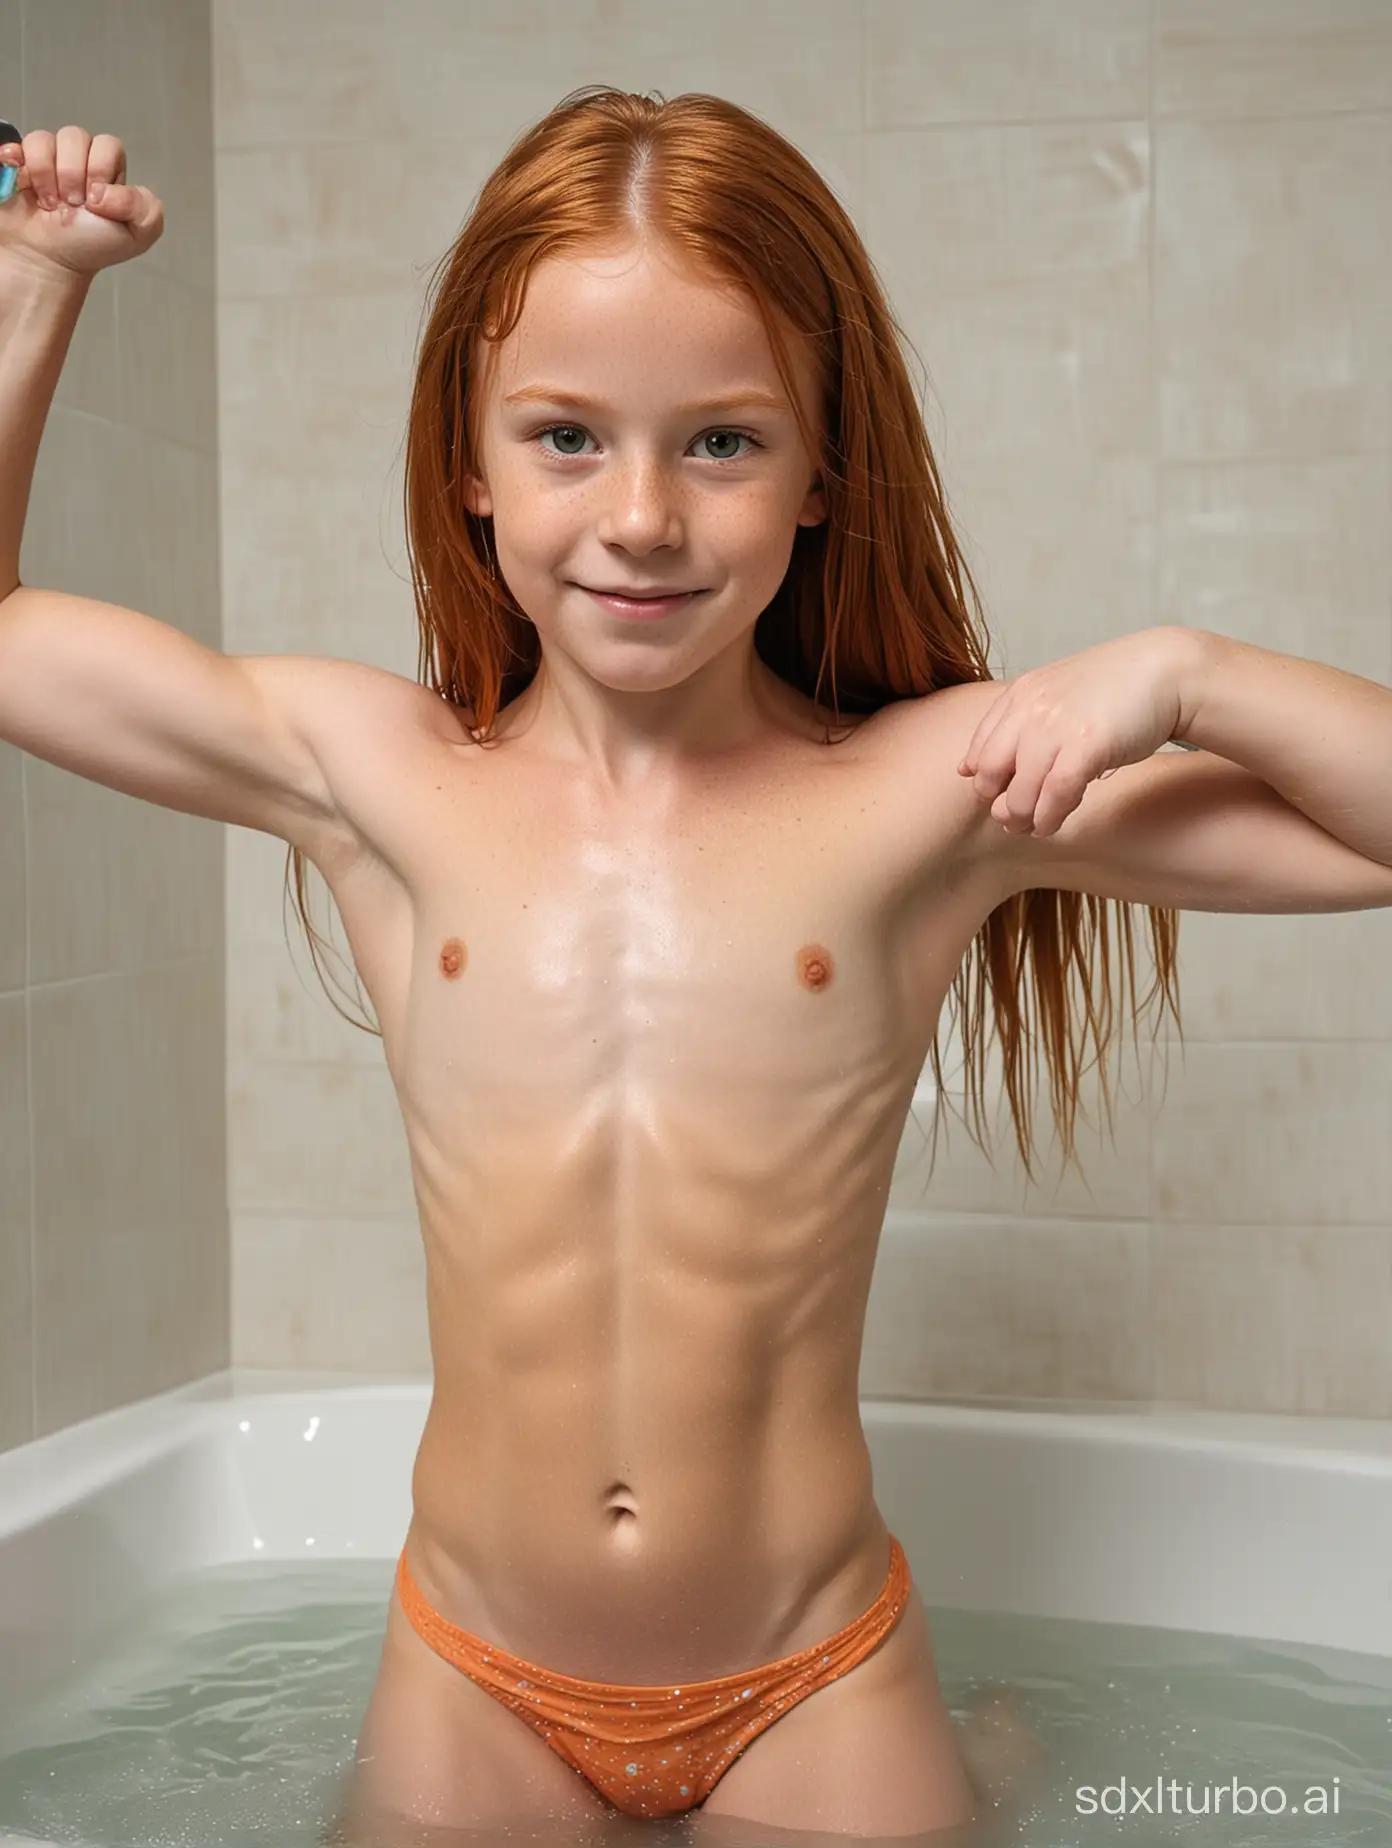 Active-9YearOld-with-Ginger-Hair-Displays-Muscular-Abs-While-Bathing